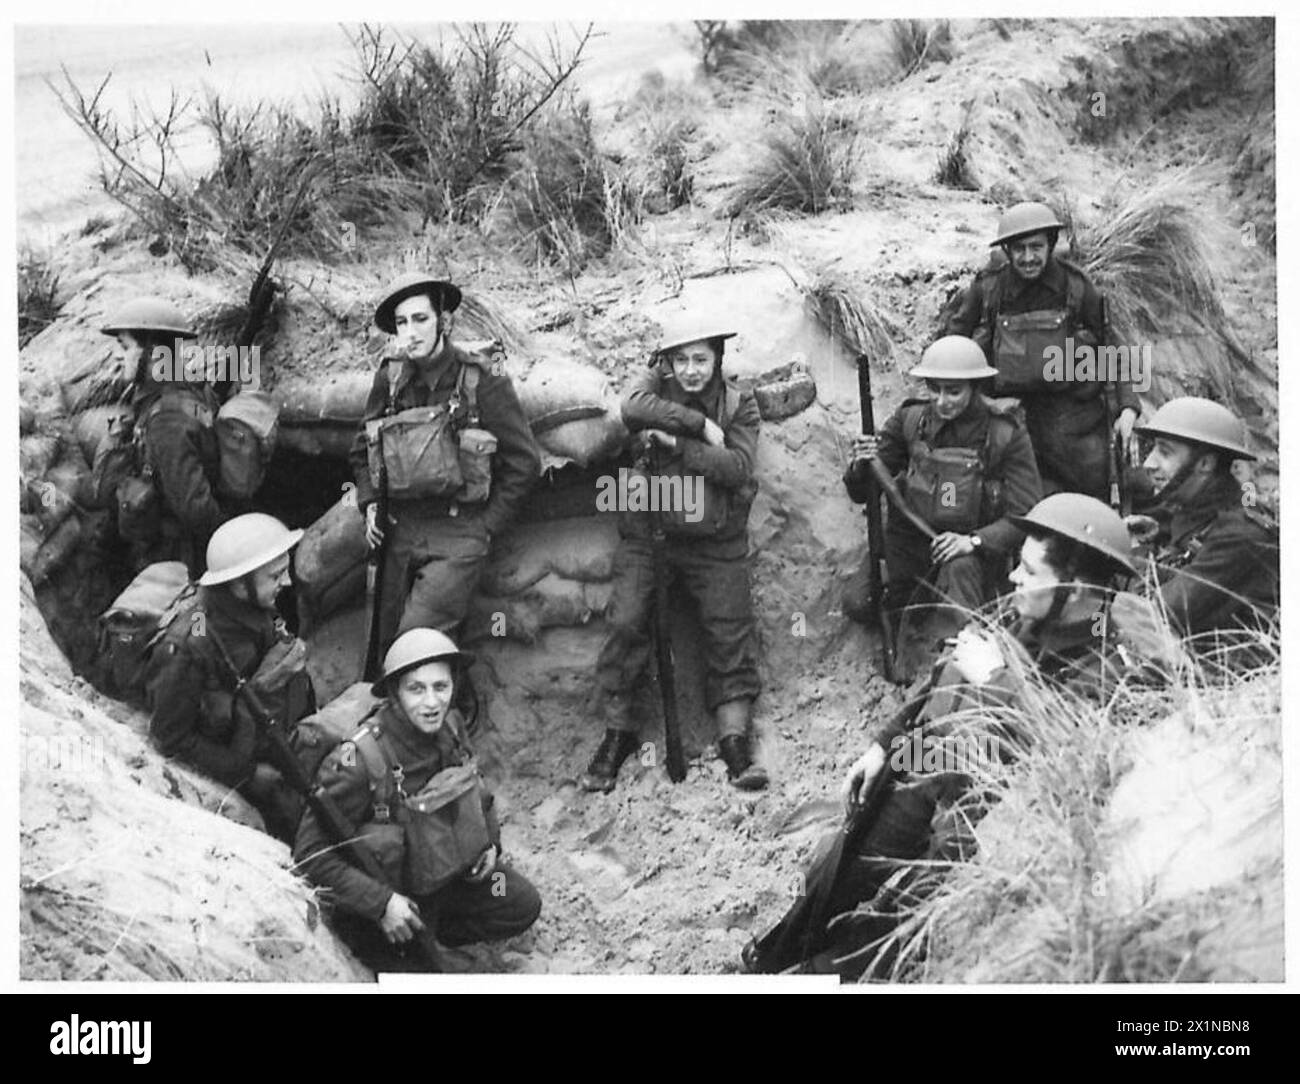 BELGIAN TROOPS IN TRAINING - During a training exercise, showing some of the Belgian soldiers in a post on the seashore, British Army Stock Photo